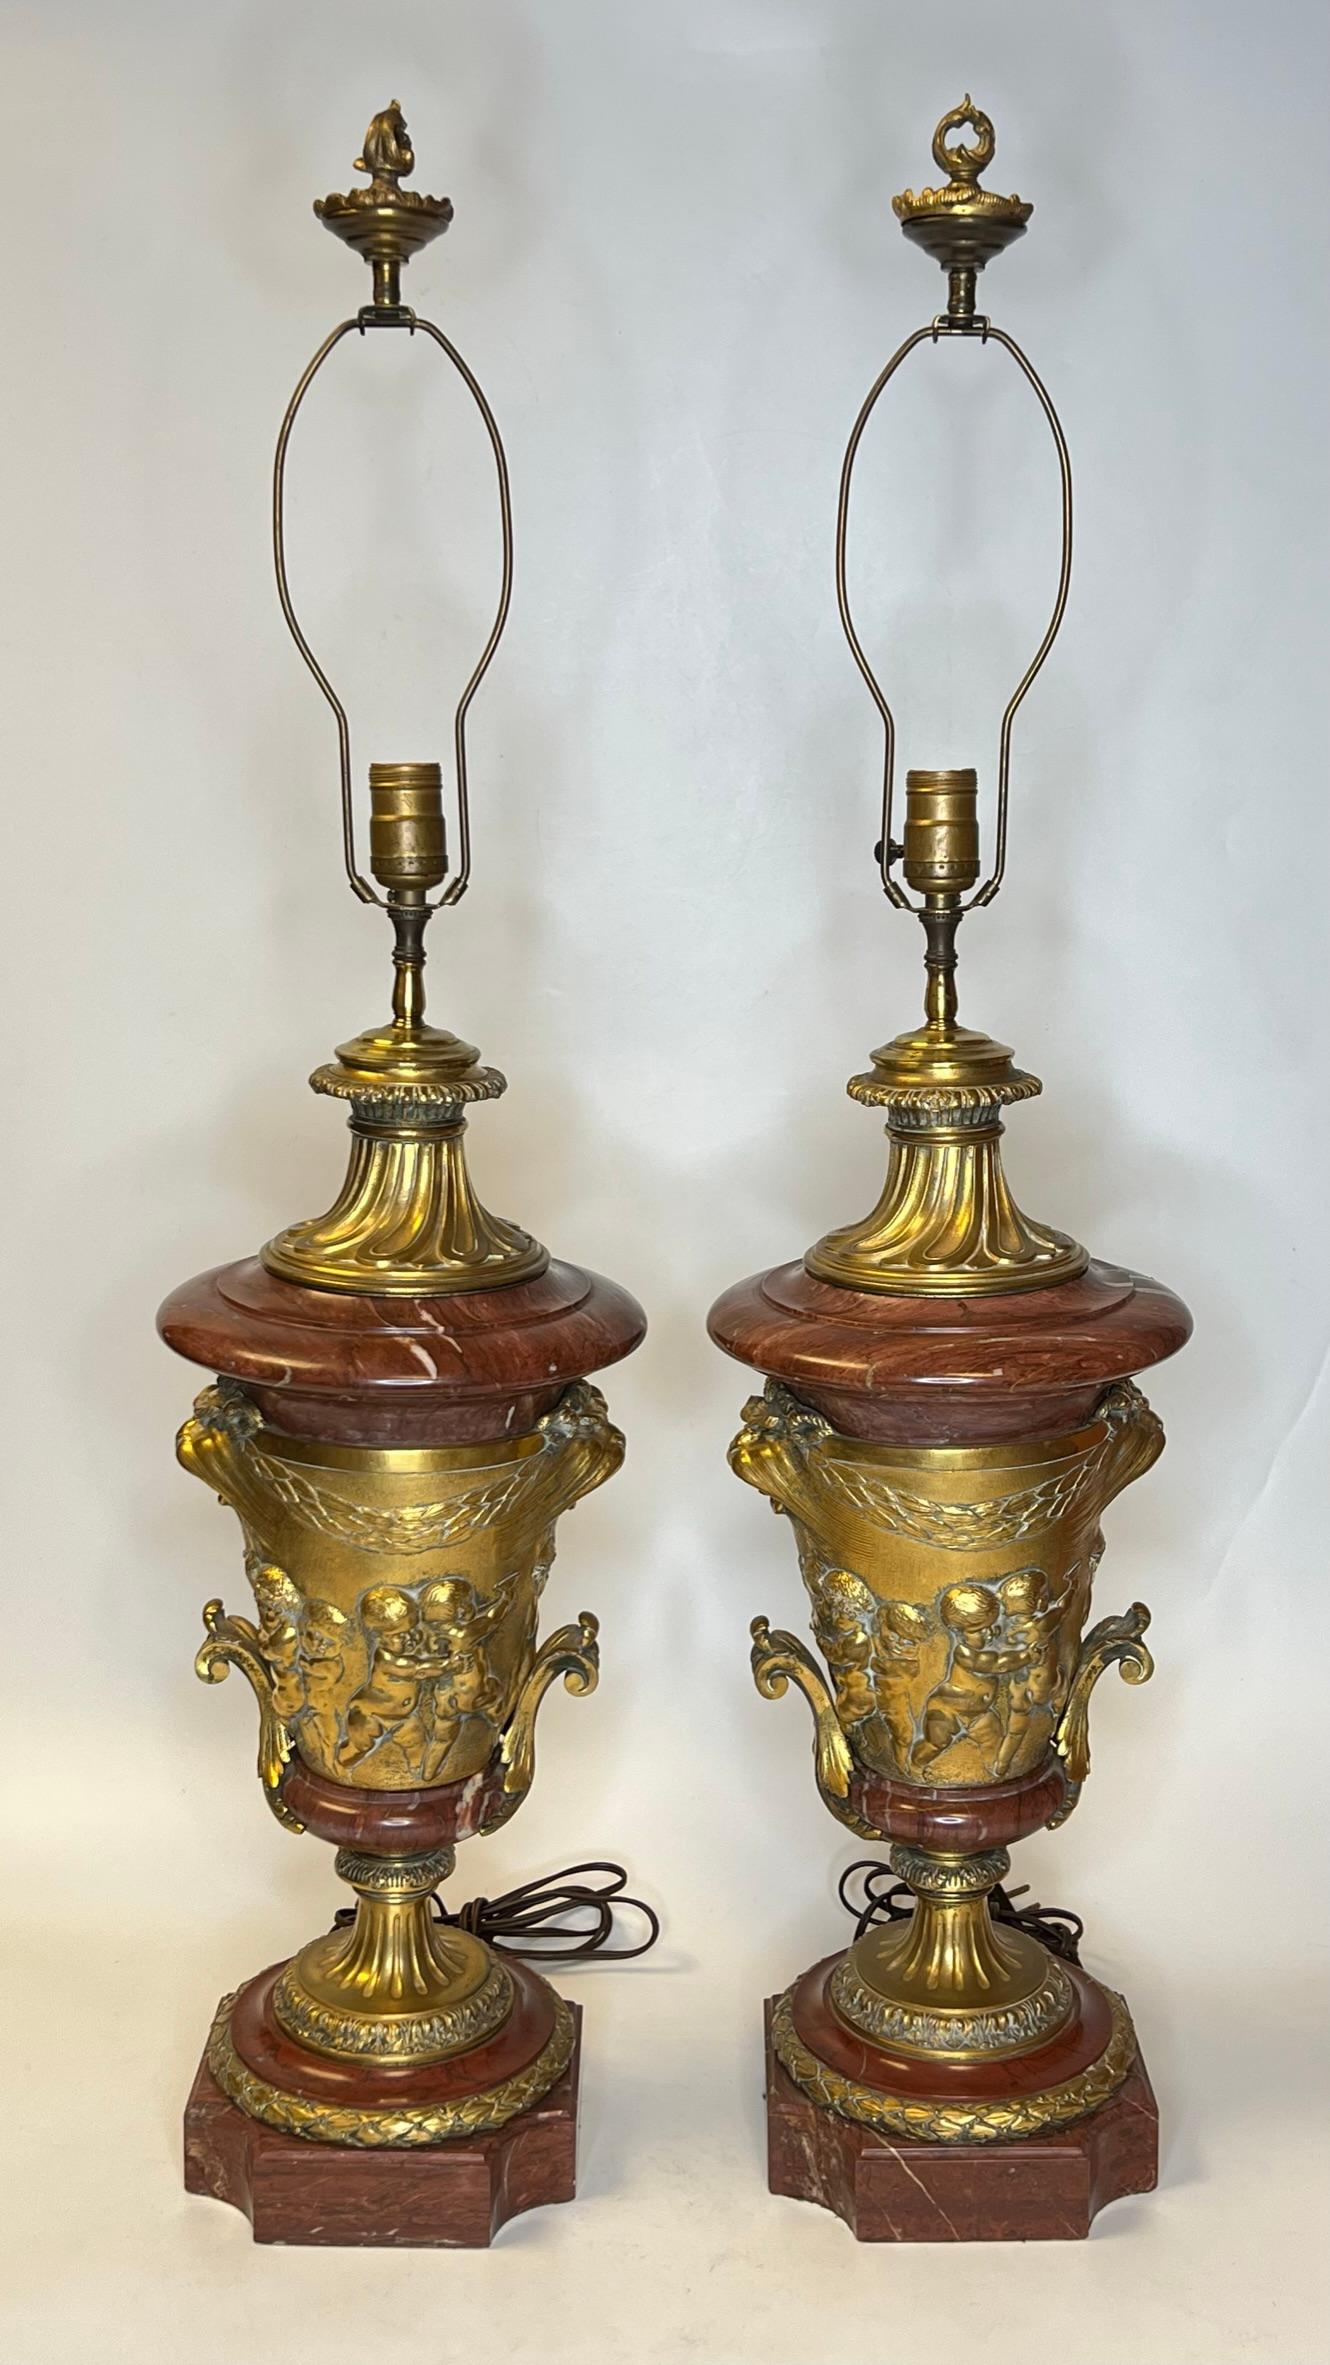 Pair of very finely cast and large French 19th century gilt bronze and rouge marble table lamps with frolicking putti and prominent lion masks.